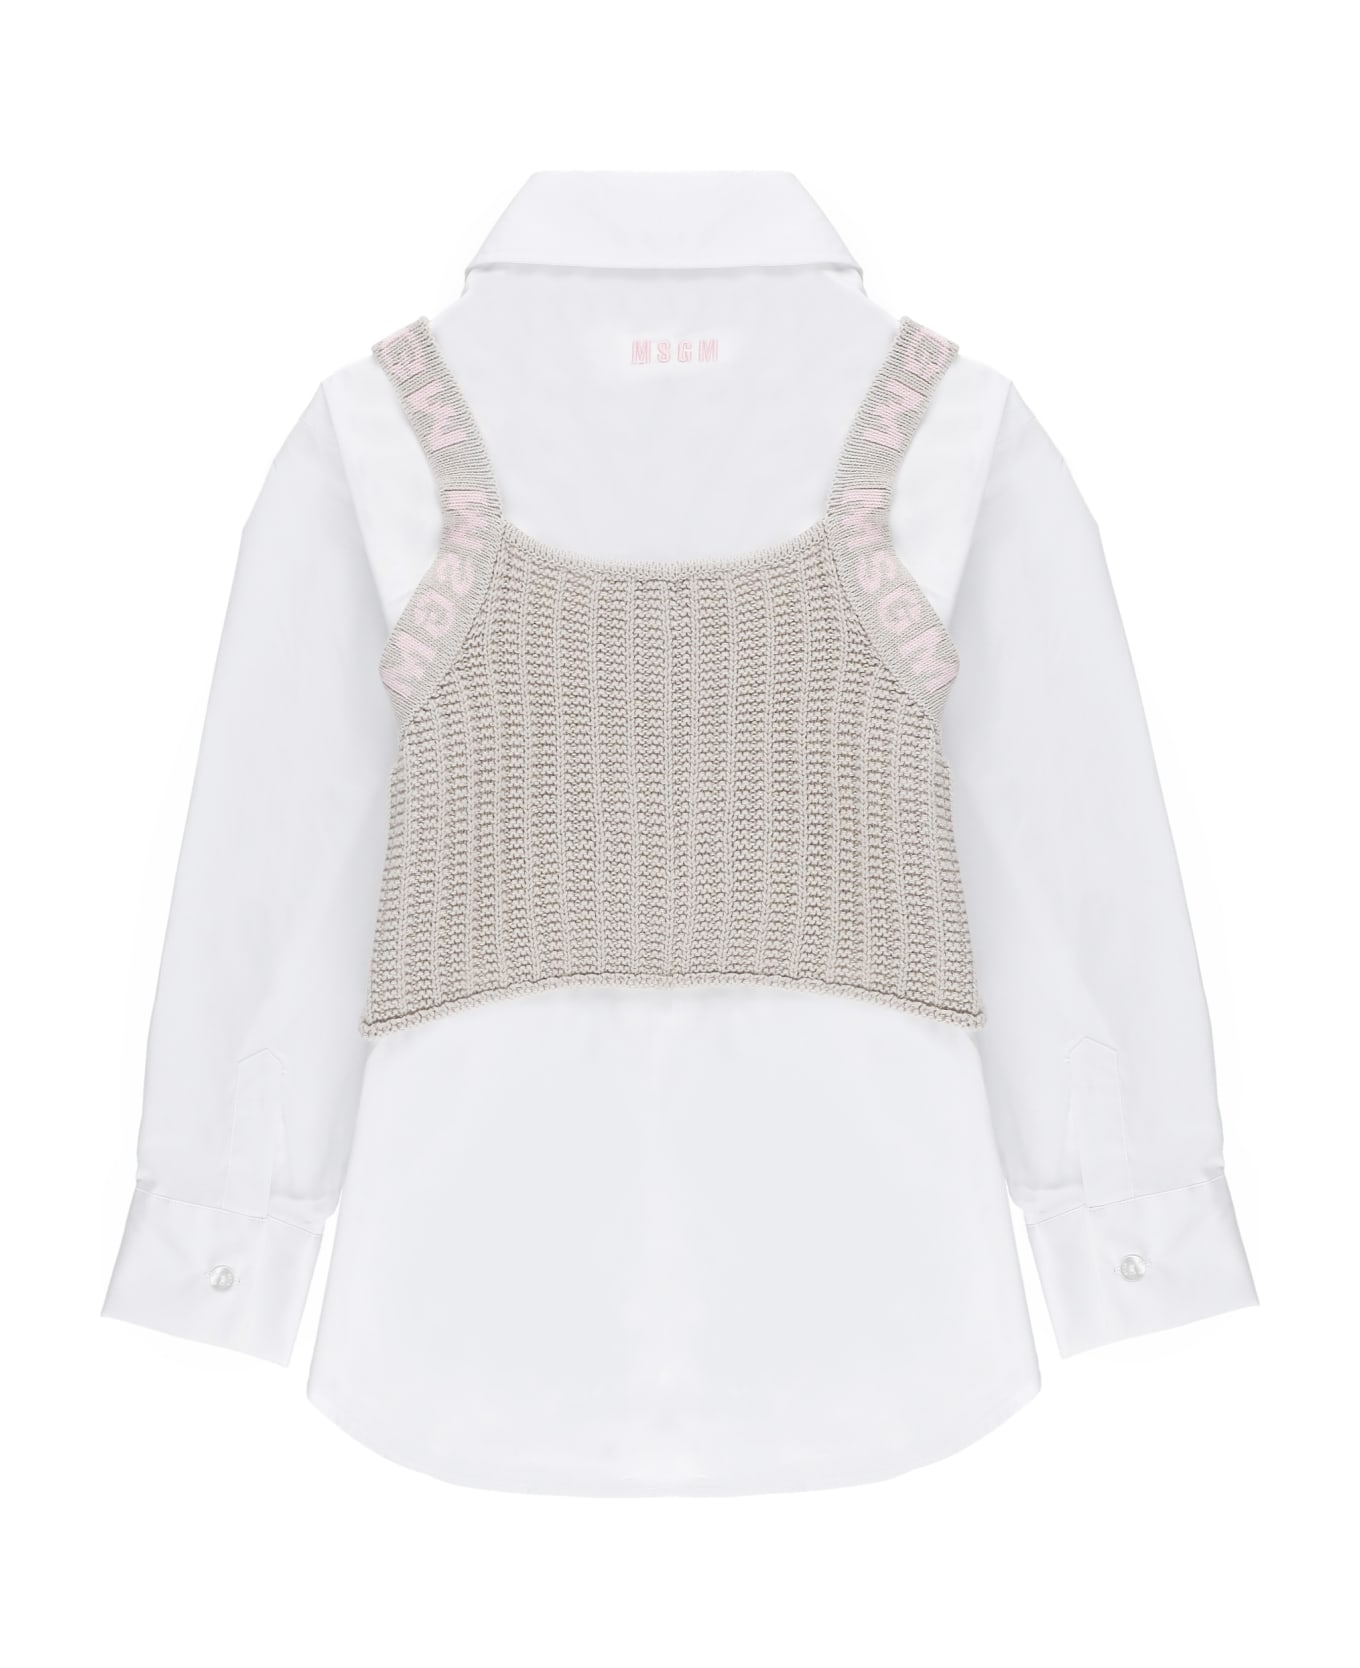 MSGM Cotton Shirt With Top - White